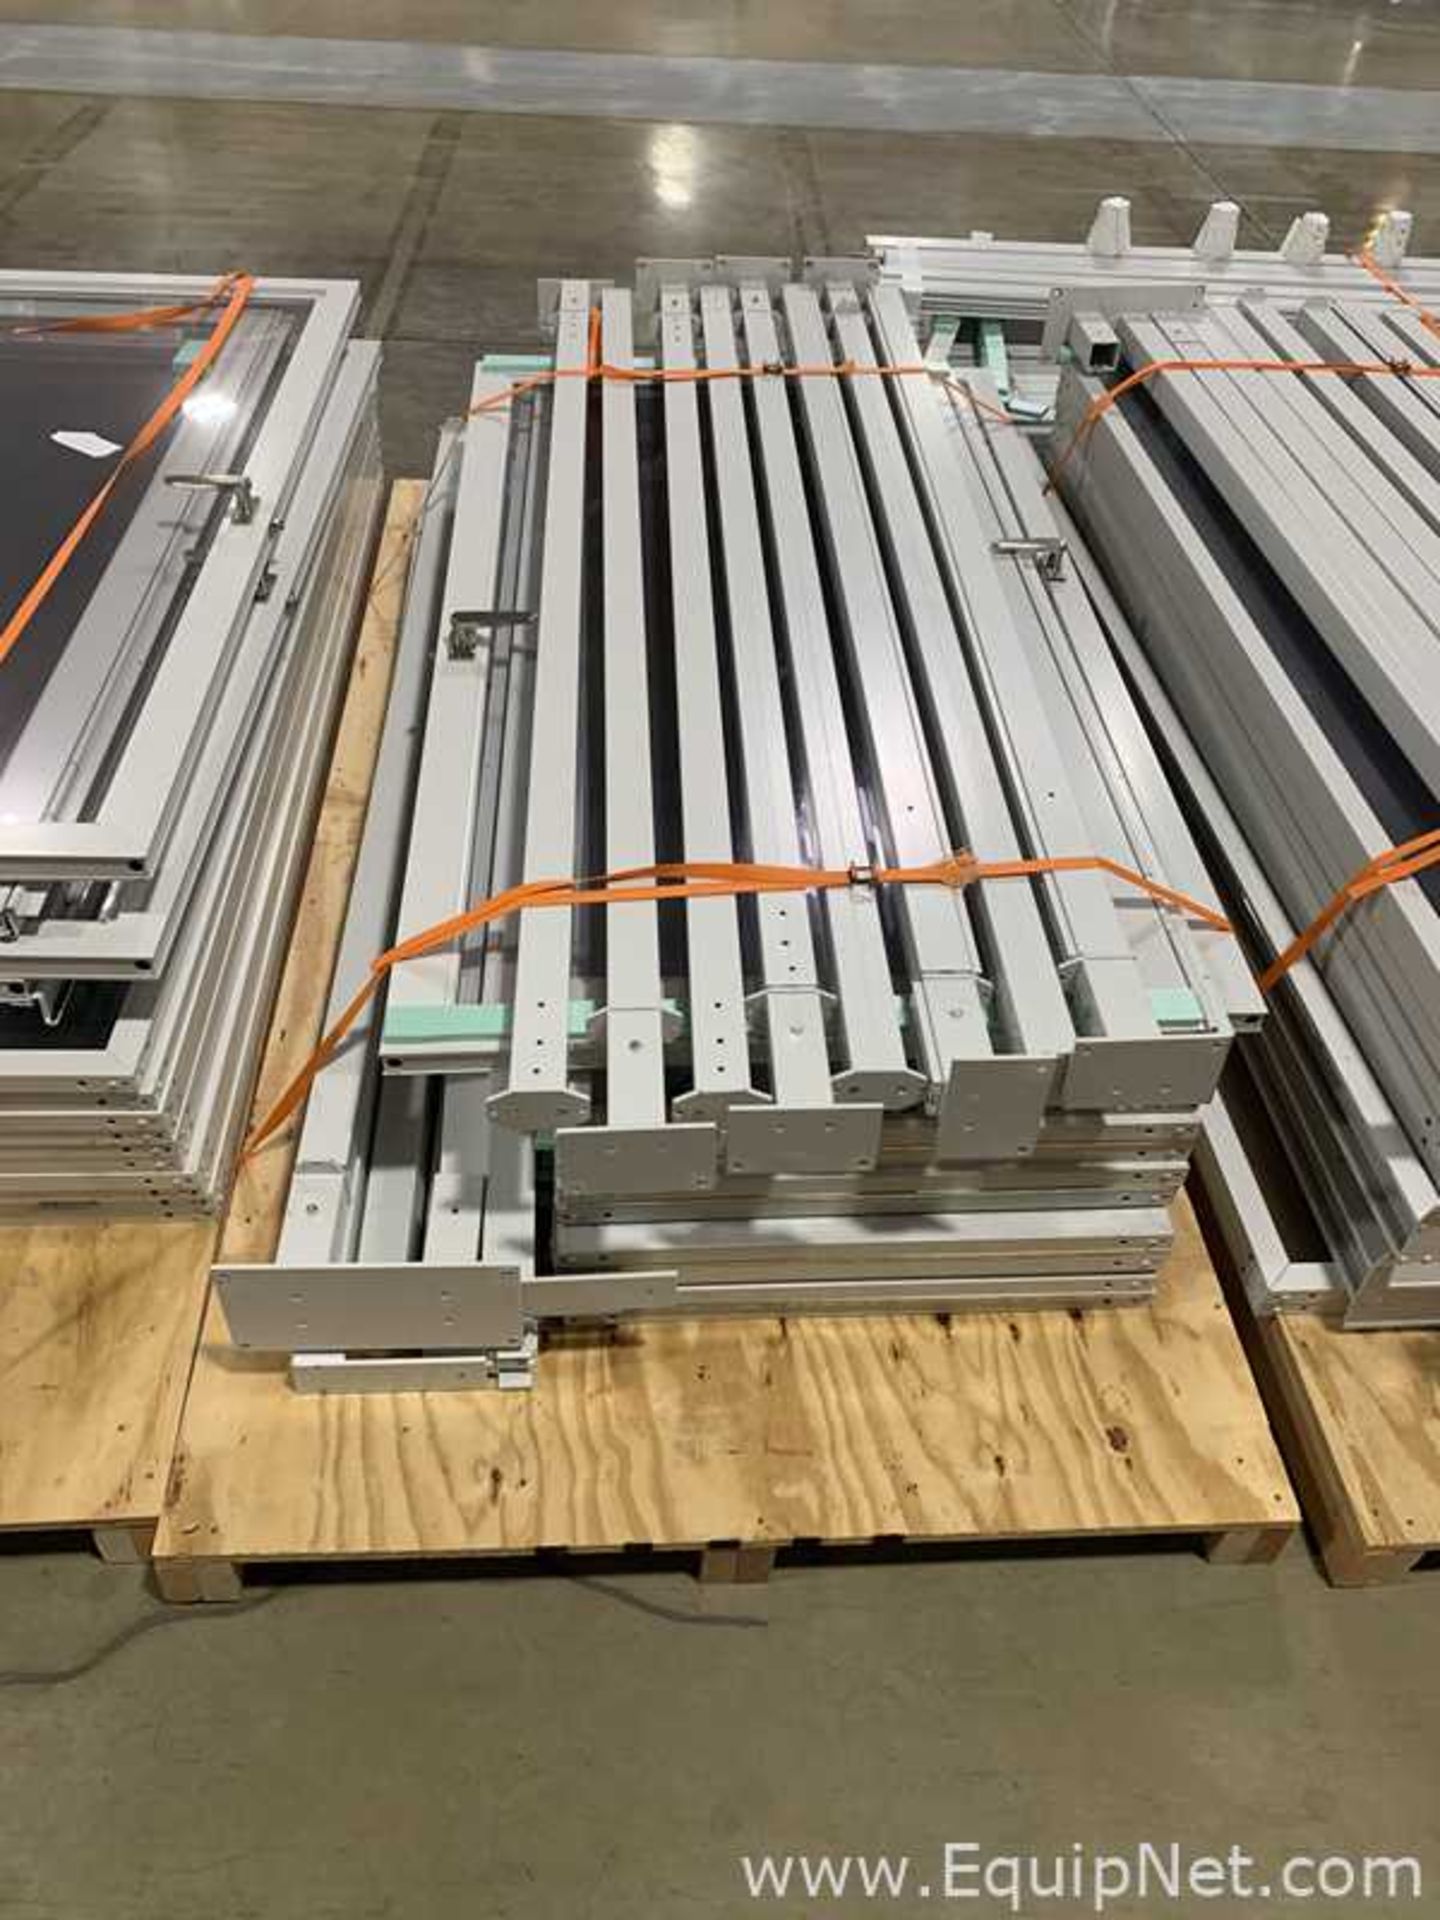 Lot of Aluminum and Plexiglas Safety Guarding - 188 Linear Ft. - Image 5 of 9